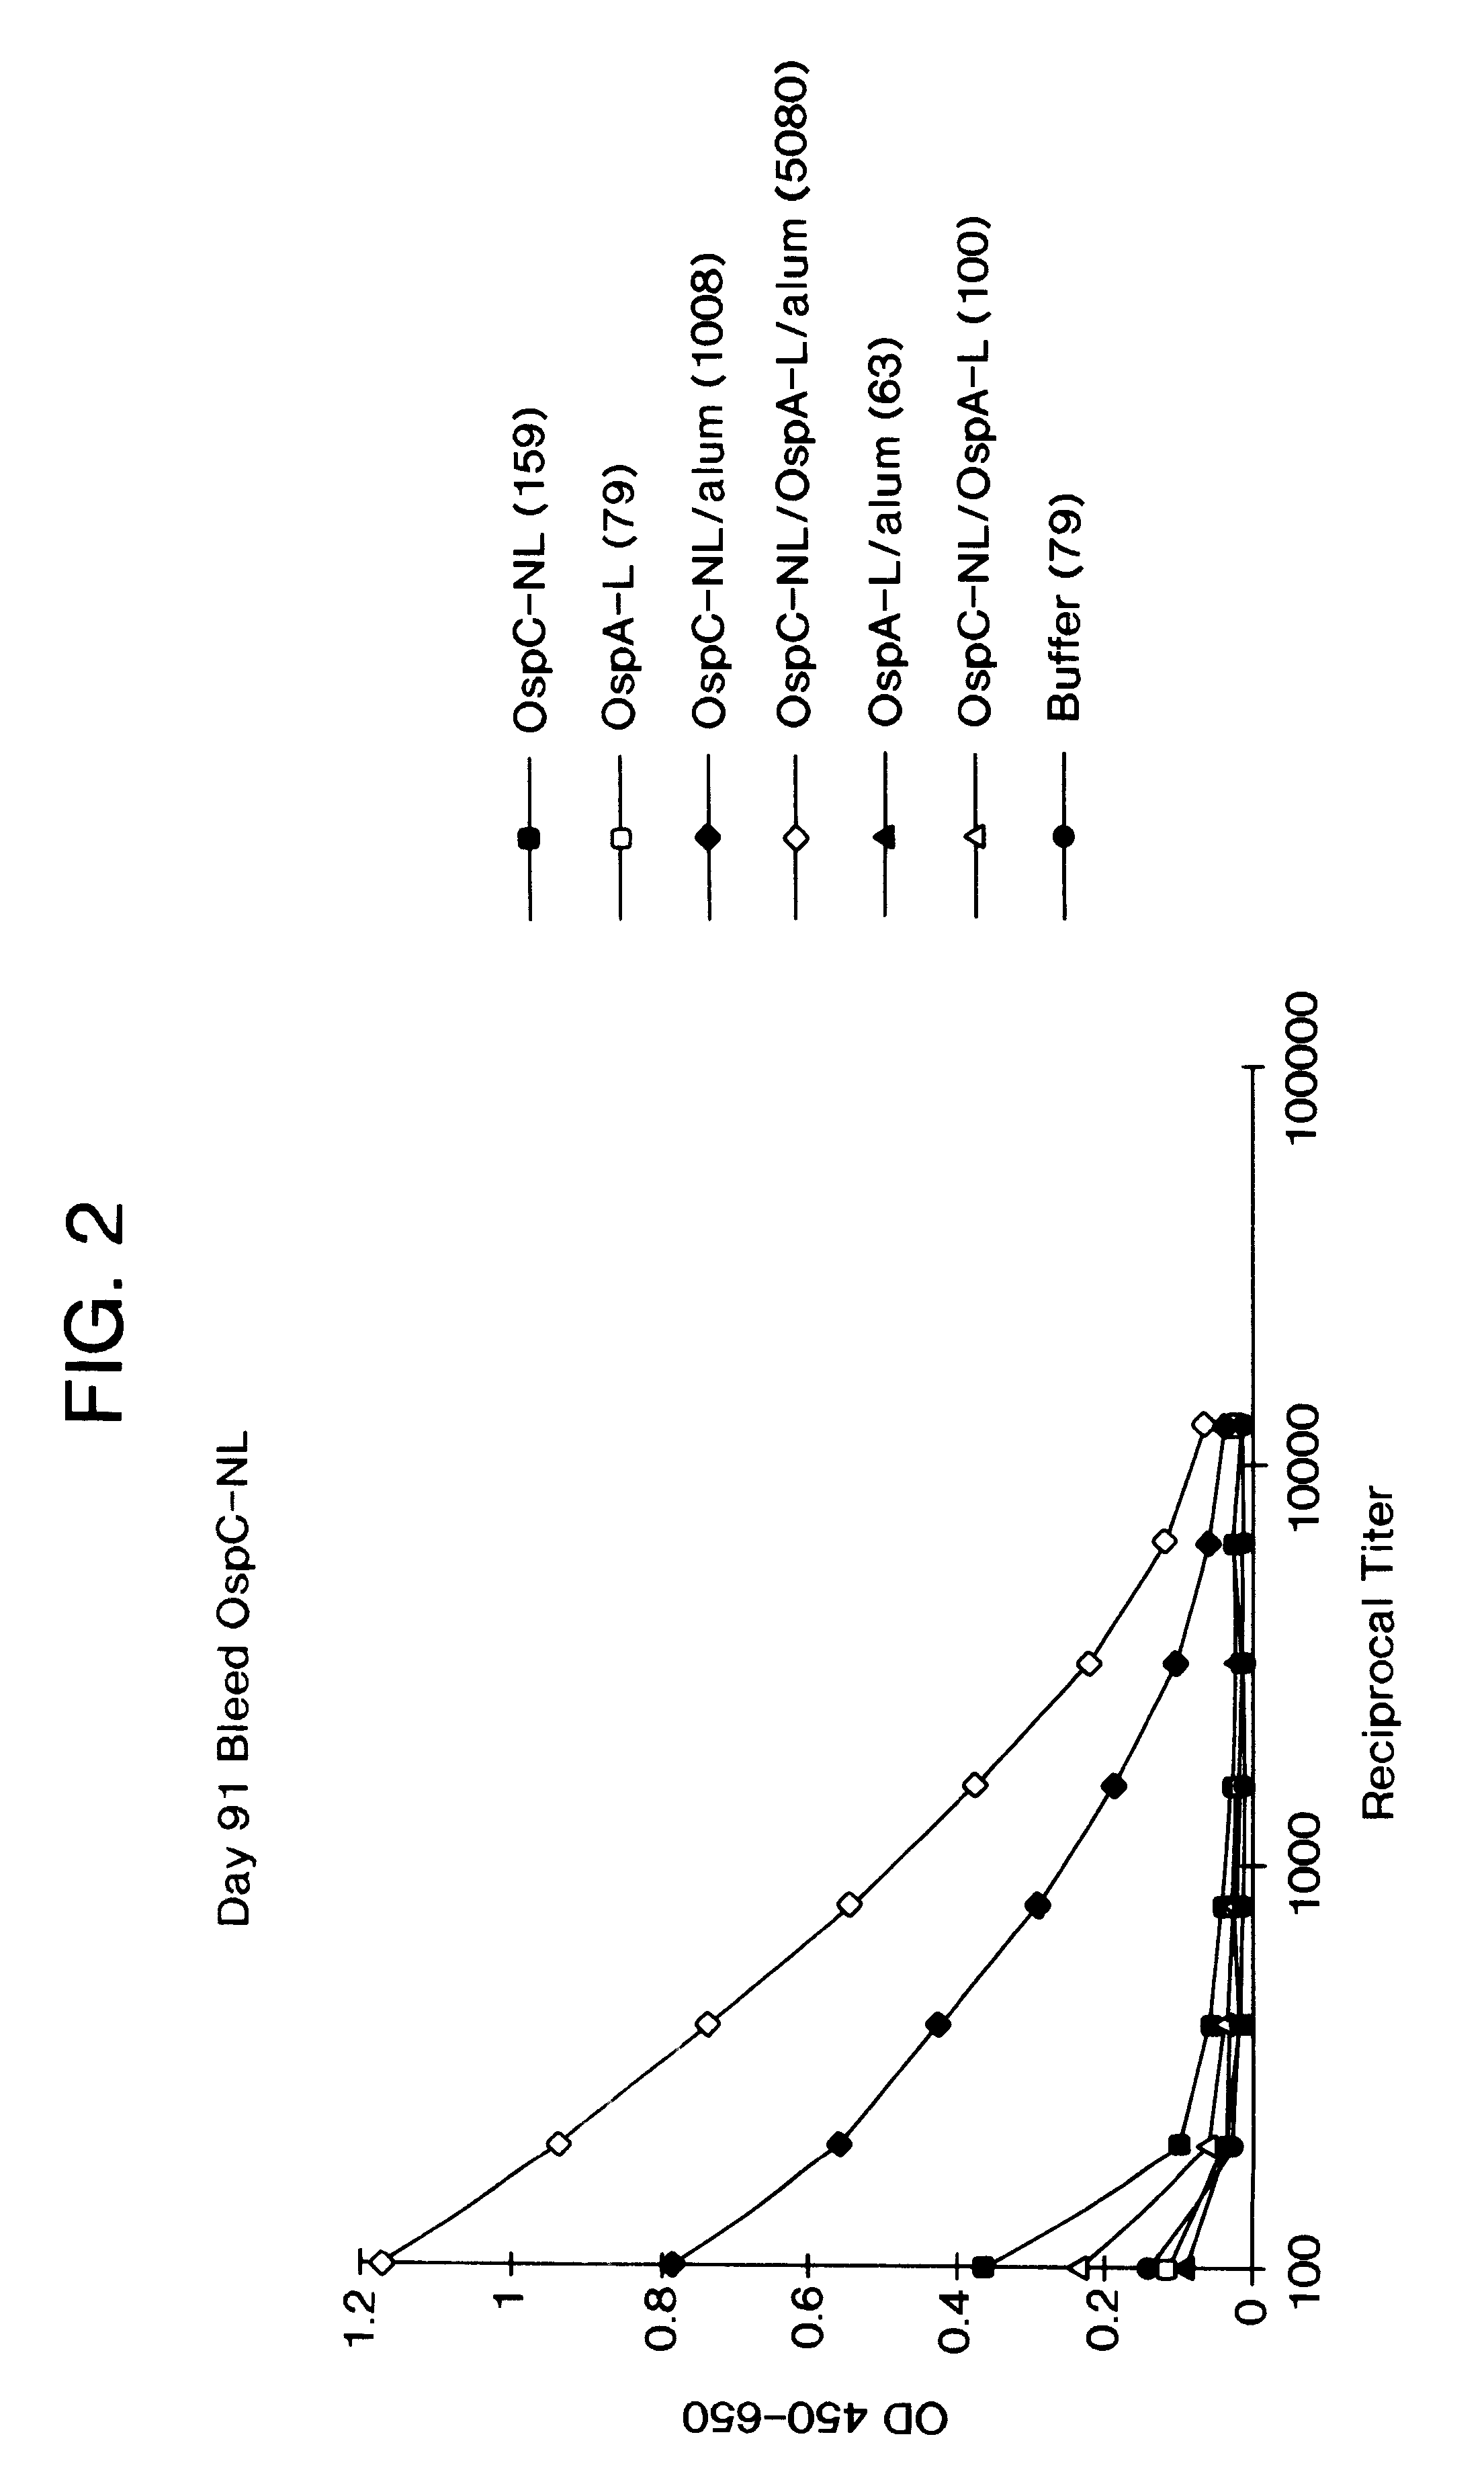 Immunological combination compositions and methods